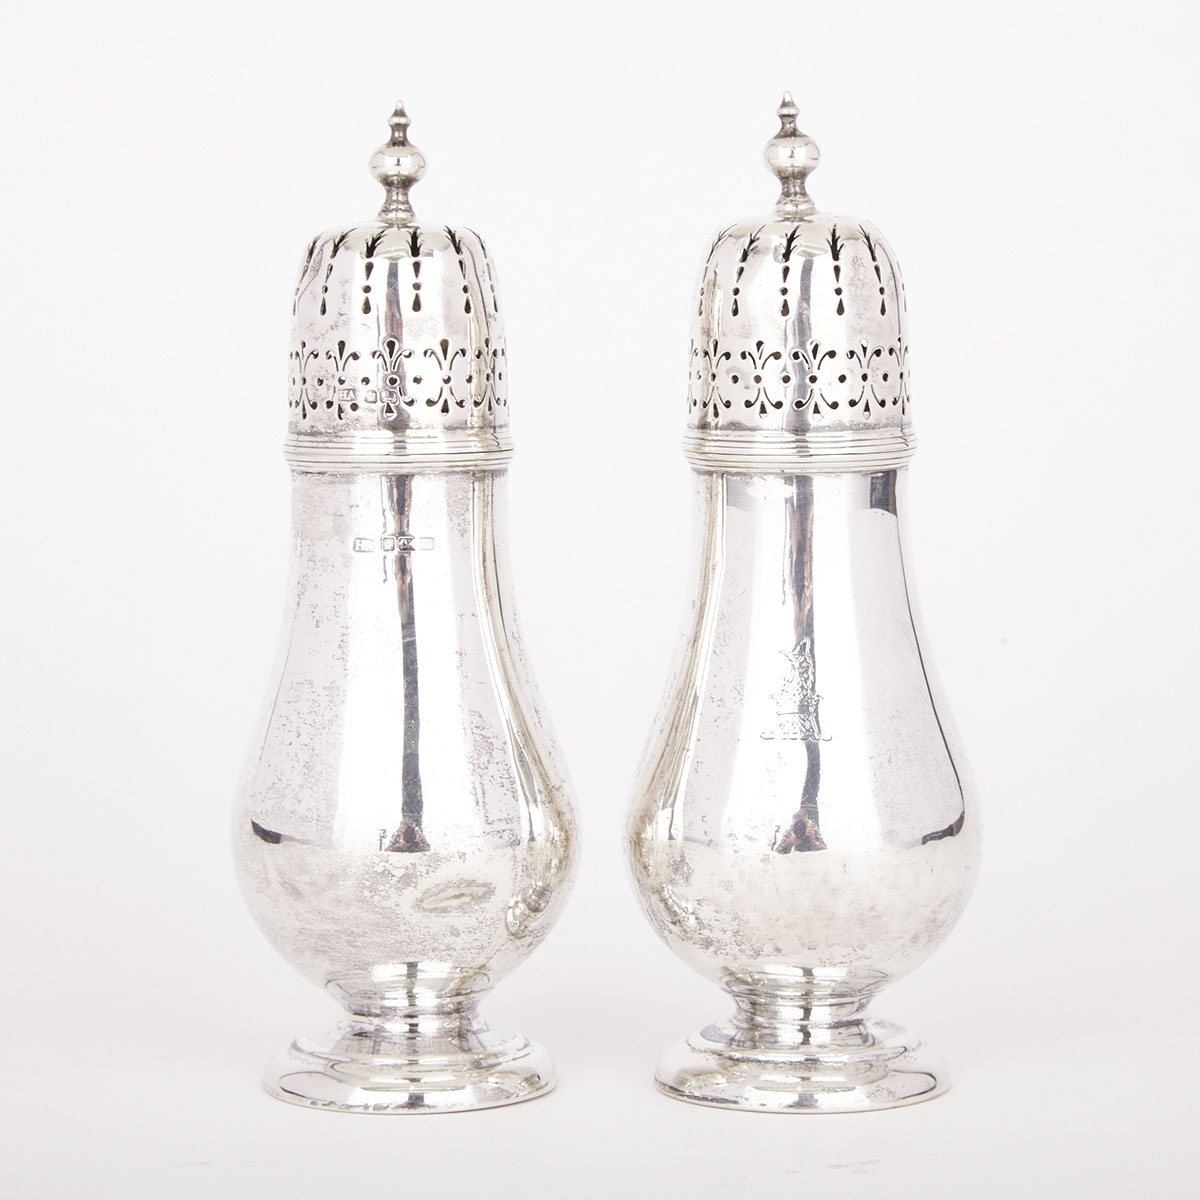 Pair of Edwardian Silver Sugar Casters, Atkin Brothers, Sheffield, 1904